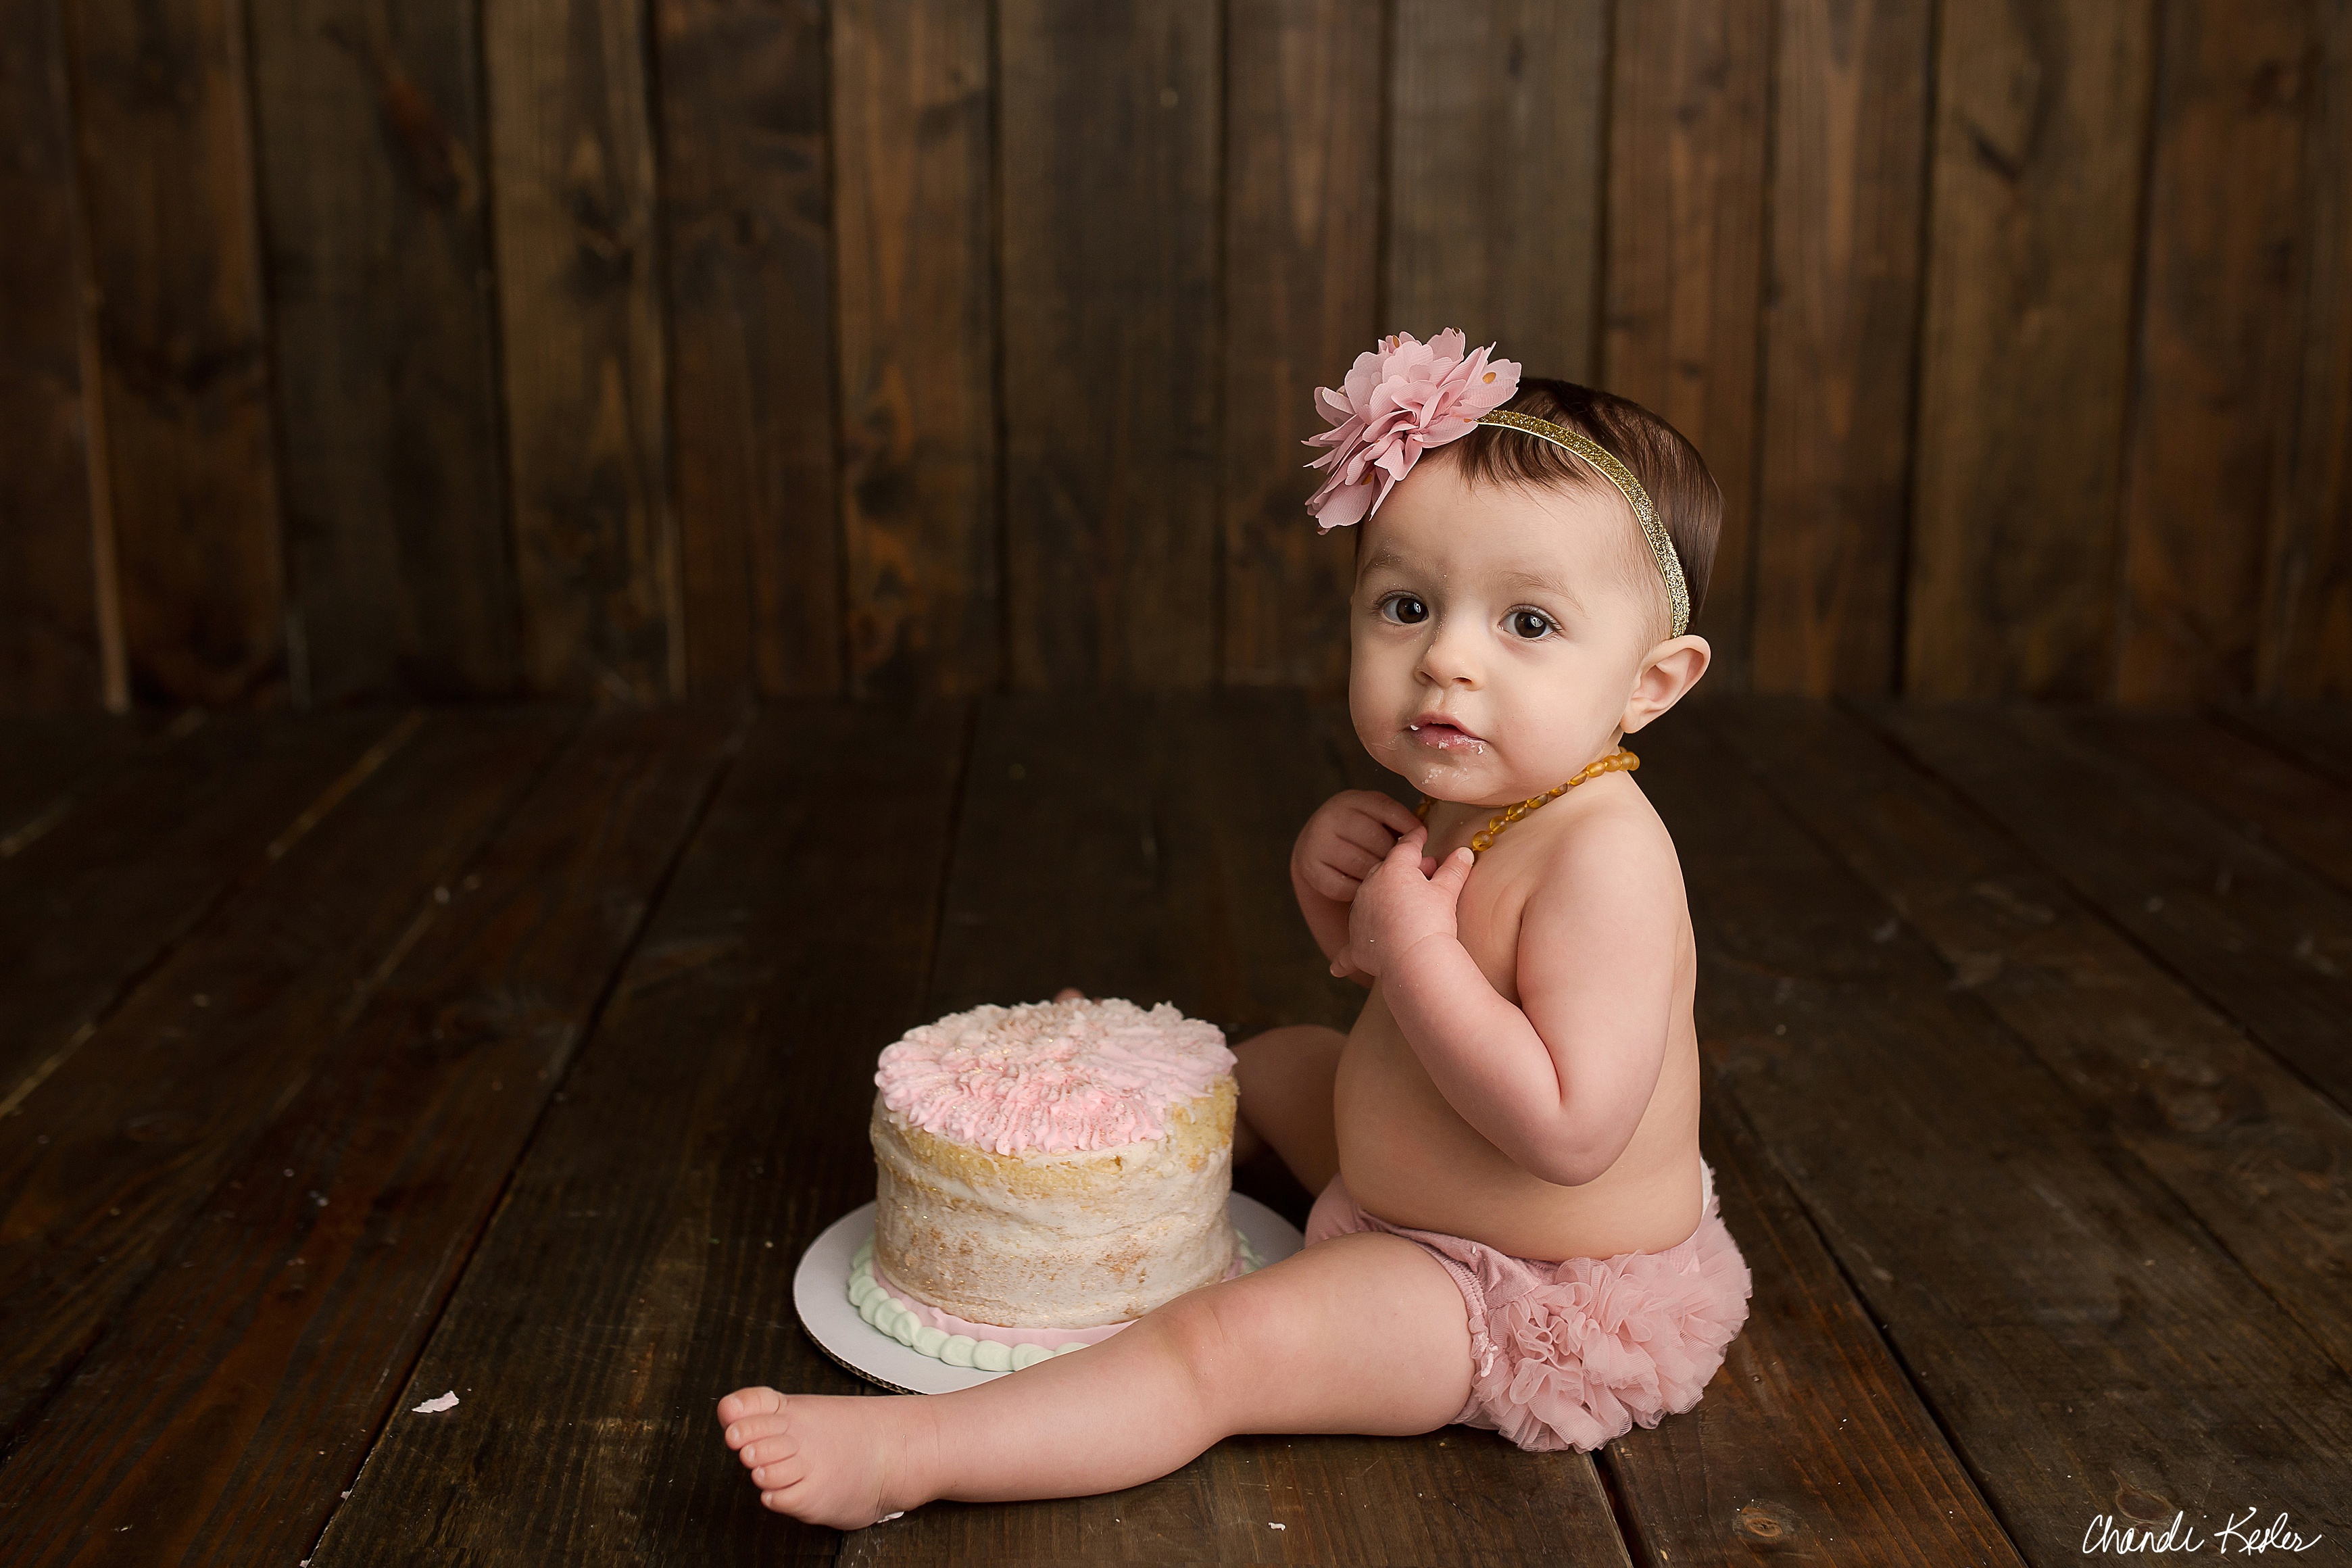 Tremont IL Photographer | 1 Year Girl Picture Ideas | Chandi Kesler Photography